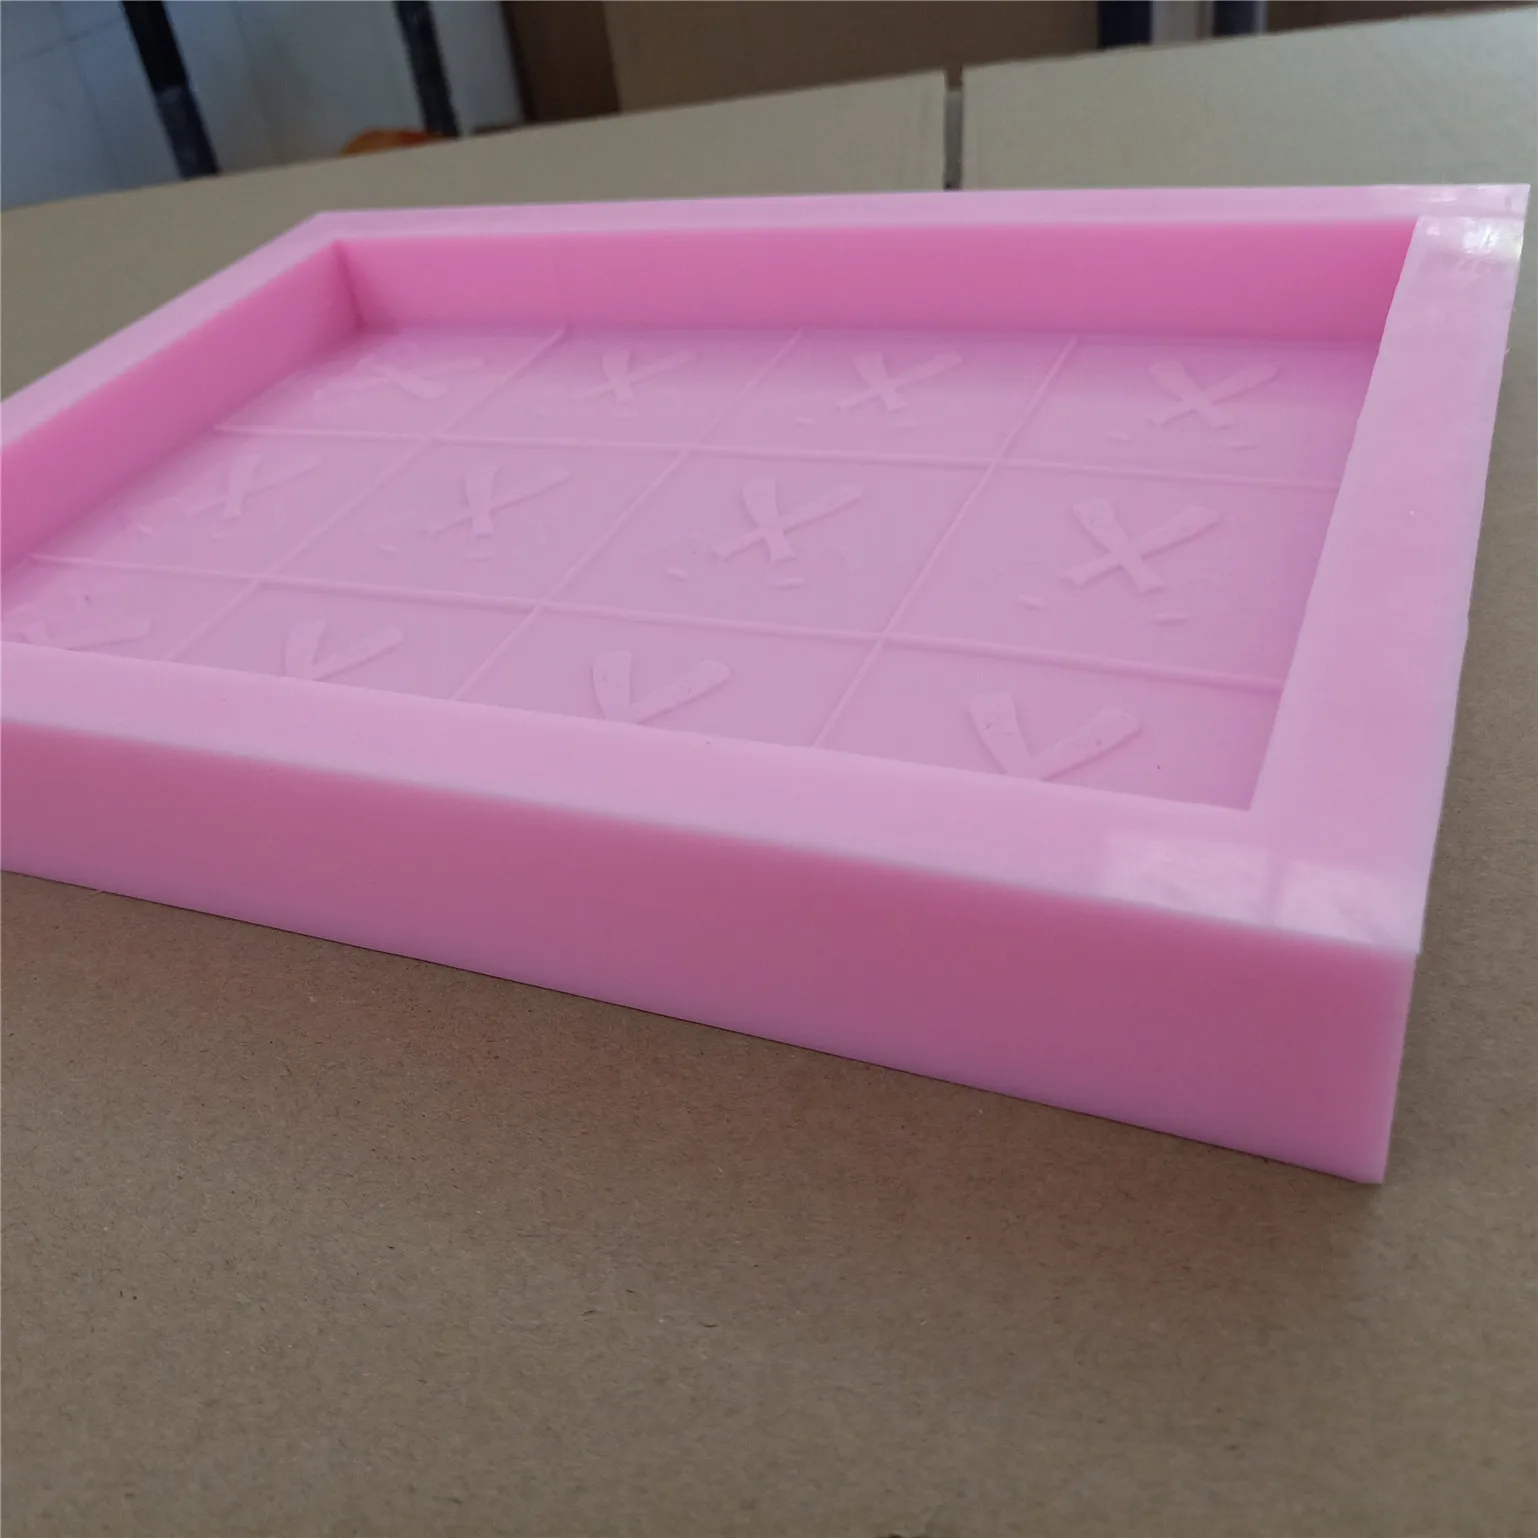 Custom Wax Melt Mold Customized Wax Melt Moulds with Personalized Shape  Size Logo Brand Silicone Wax Melts Molds in Trays Forms